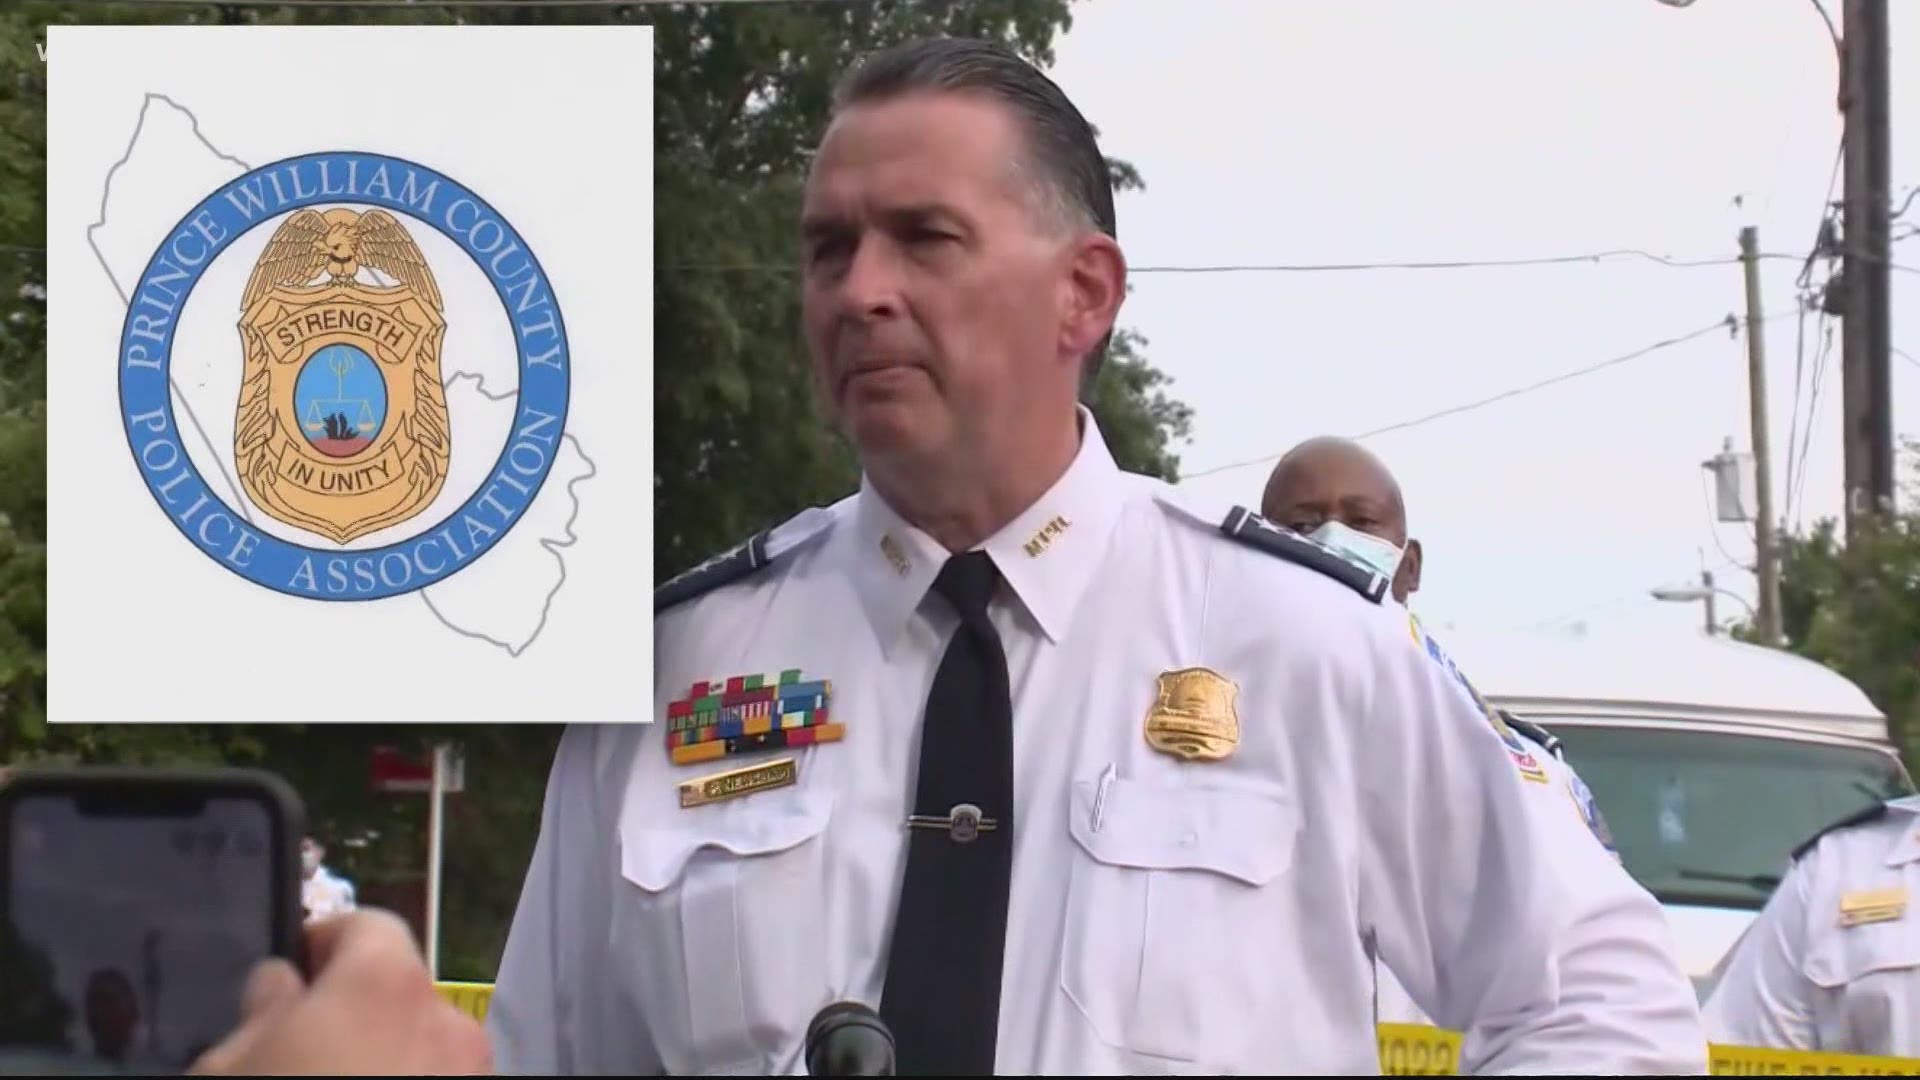 The Prince William County Police Association said the DC chief wasn’t on their radar, but that they are excited to move forward with him.